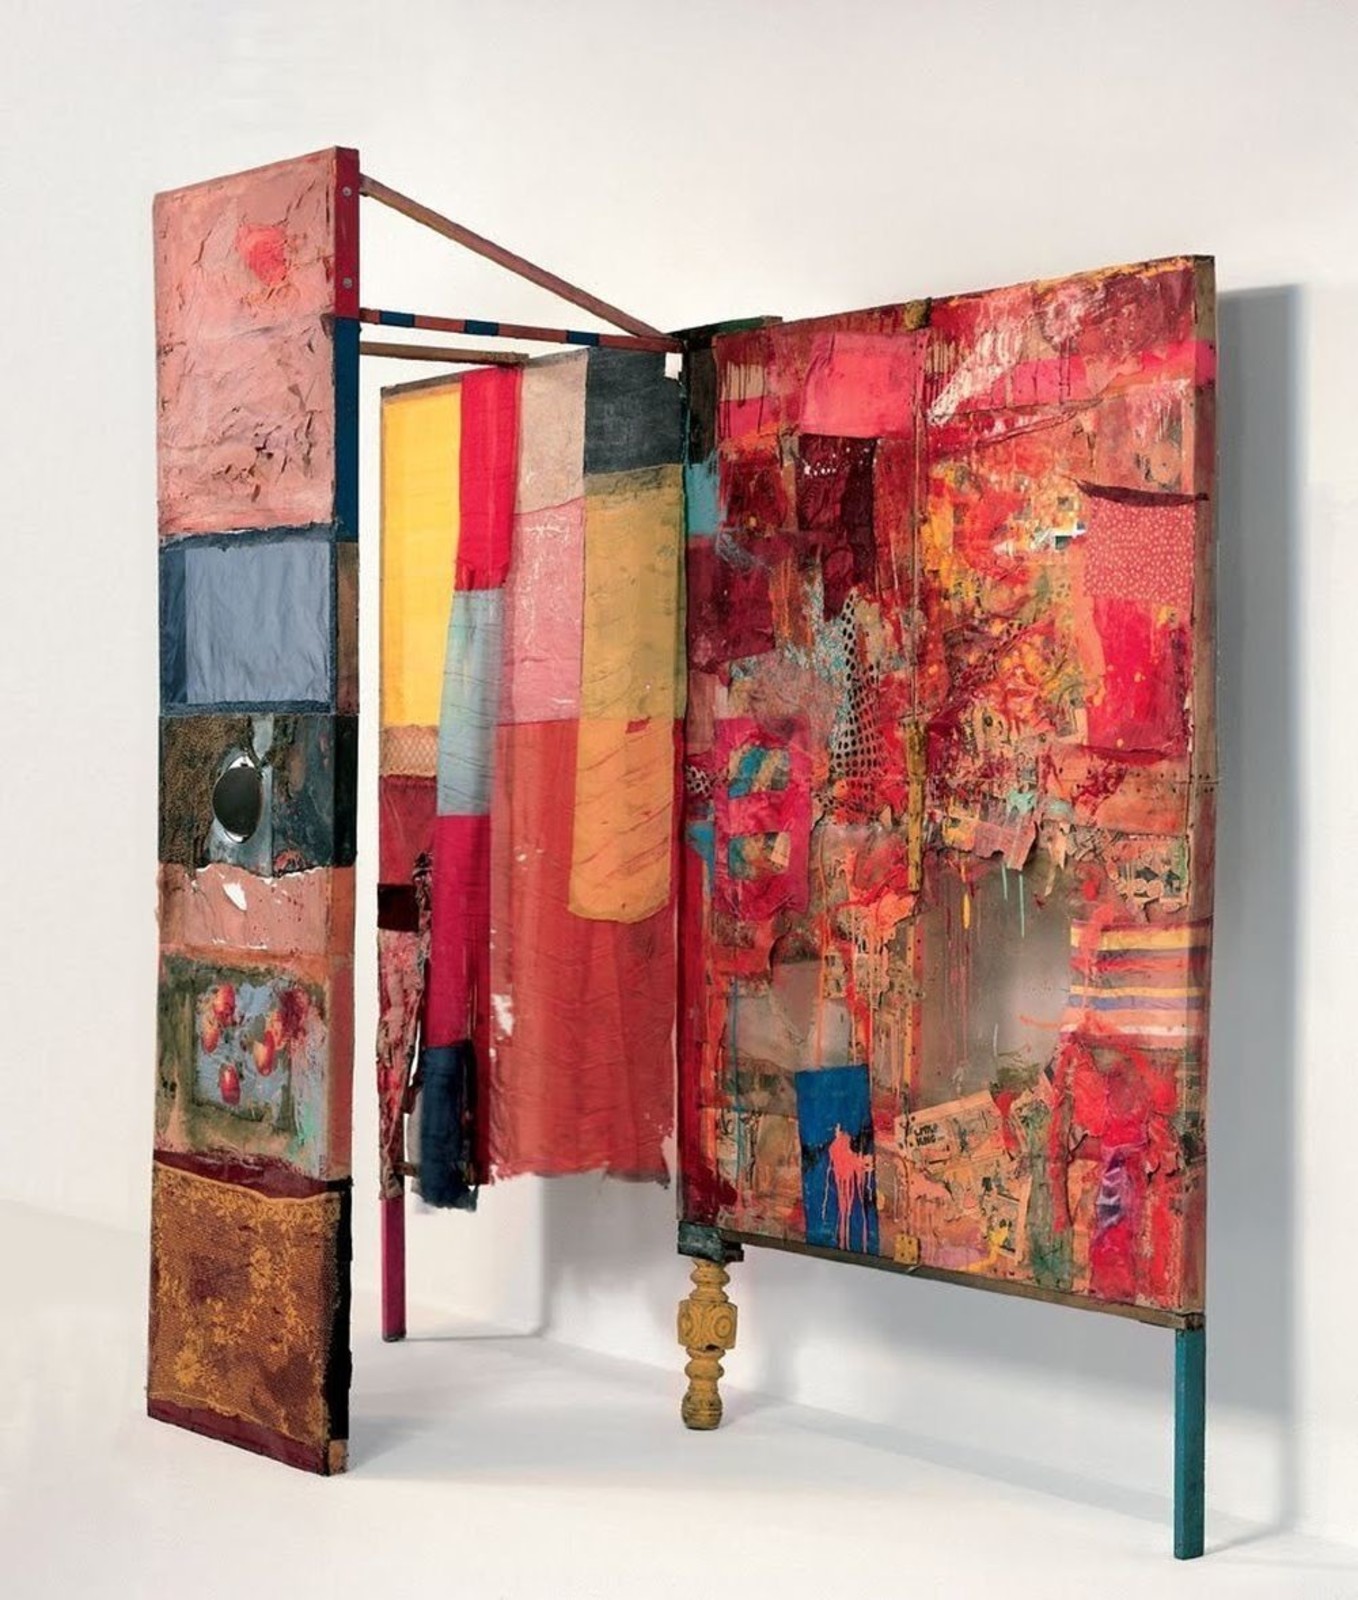 Robert Rauschenberg. Minutiae. 1954. Oil, paper, fabric, newspaper, wood, metal, plastic with mirror, on wooden structure. 214.6 x 205.7 x 77.4 cm. Private collection (Switzerland)